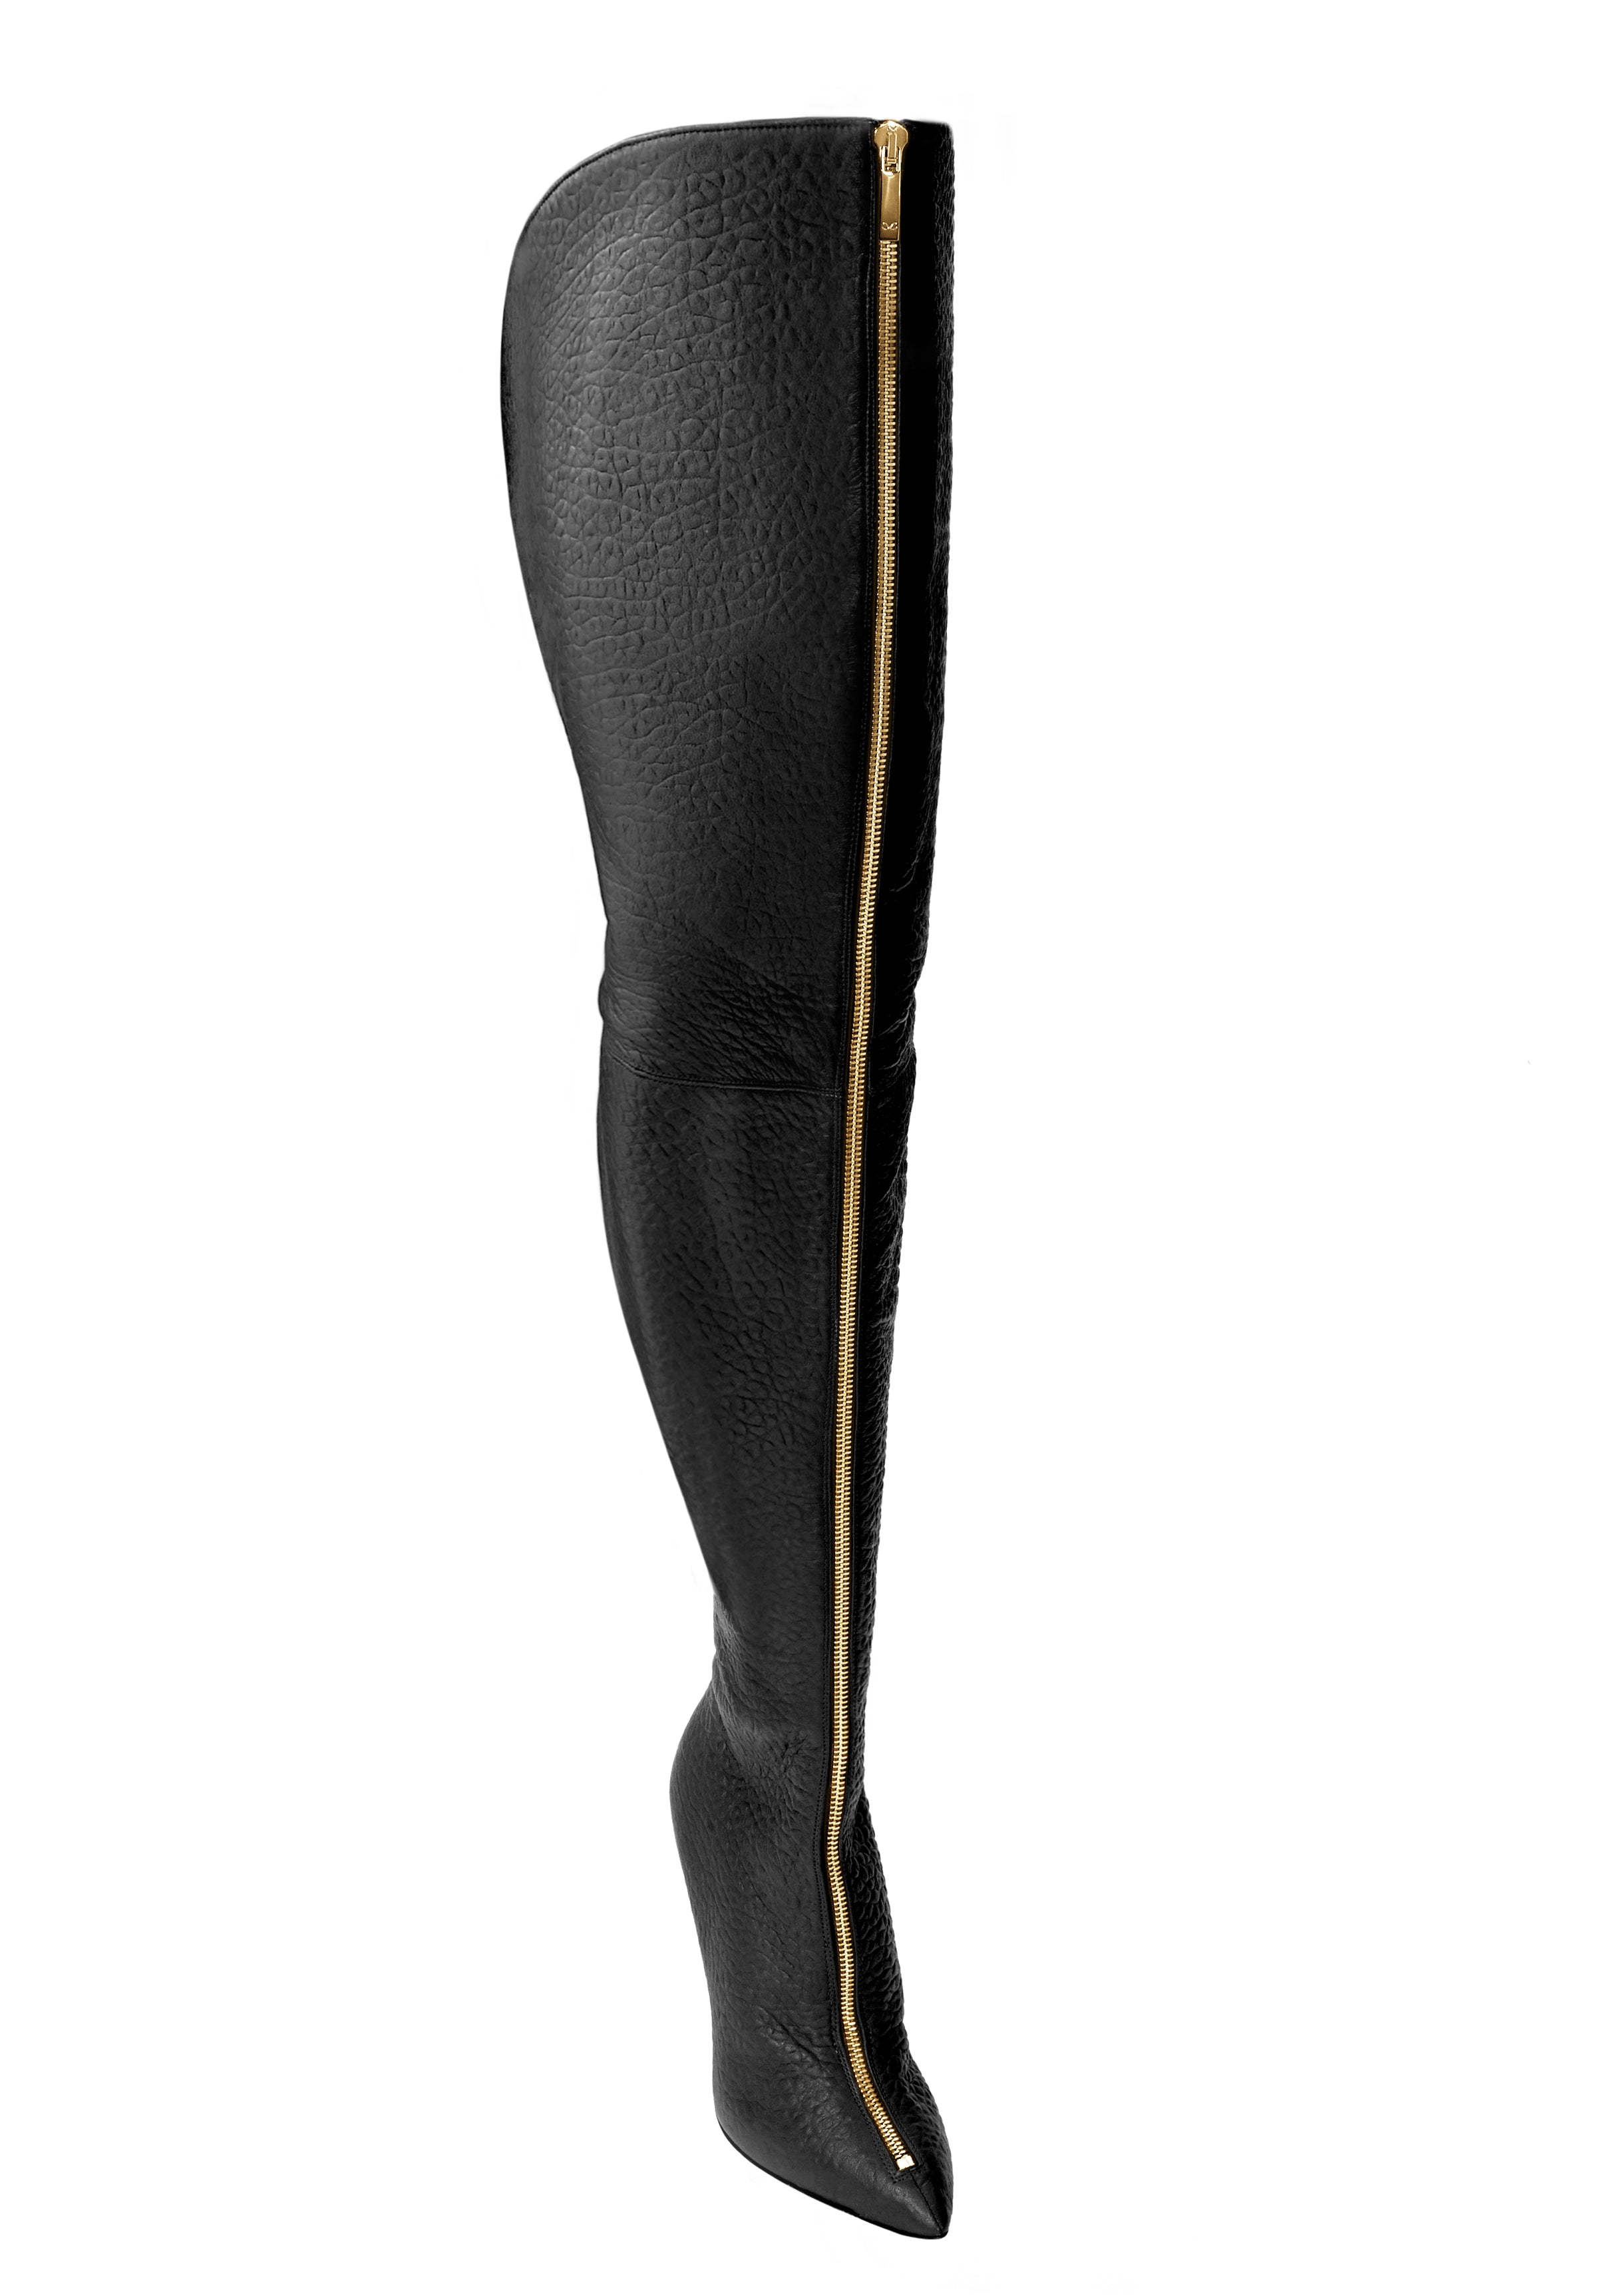 BLAIR WIDE BLACK GOLD LEATHER THIGH-HIGH BOOT